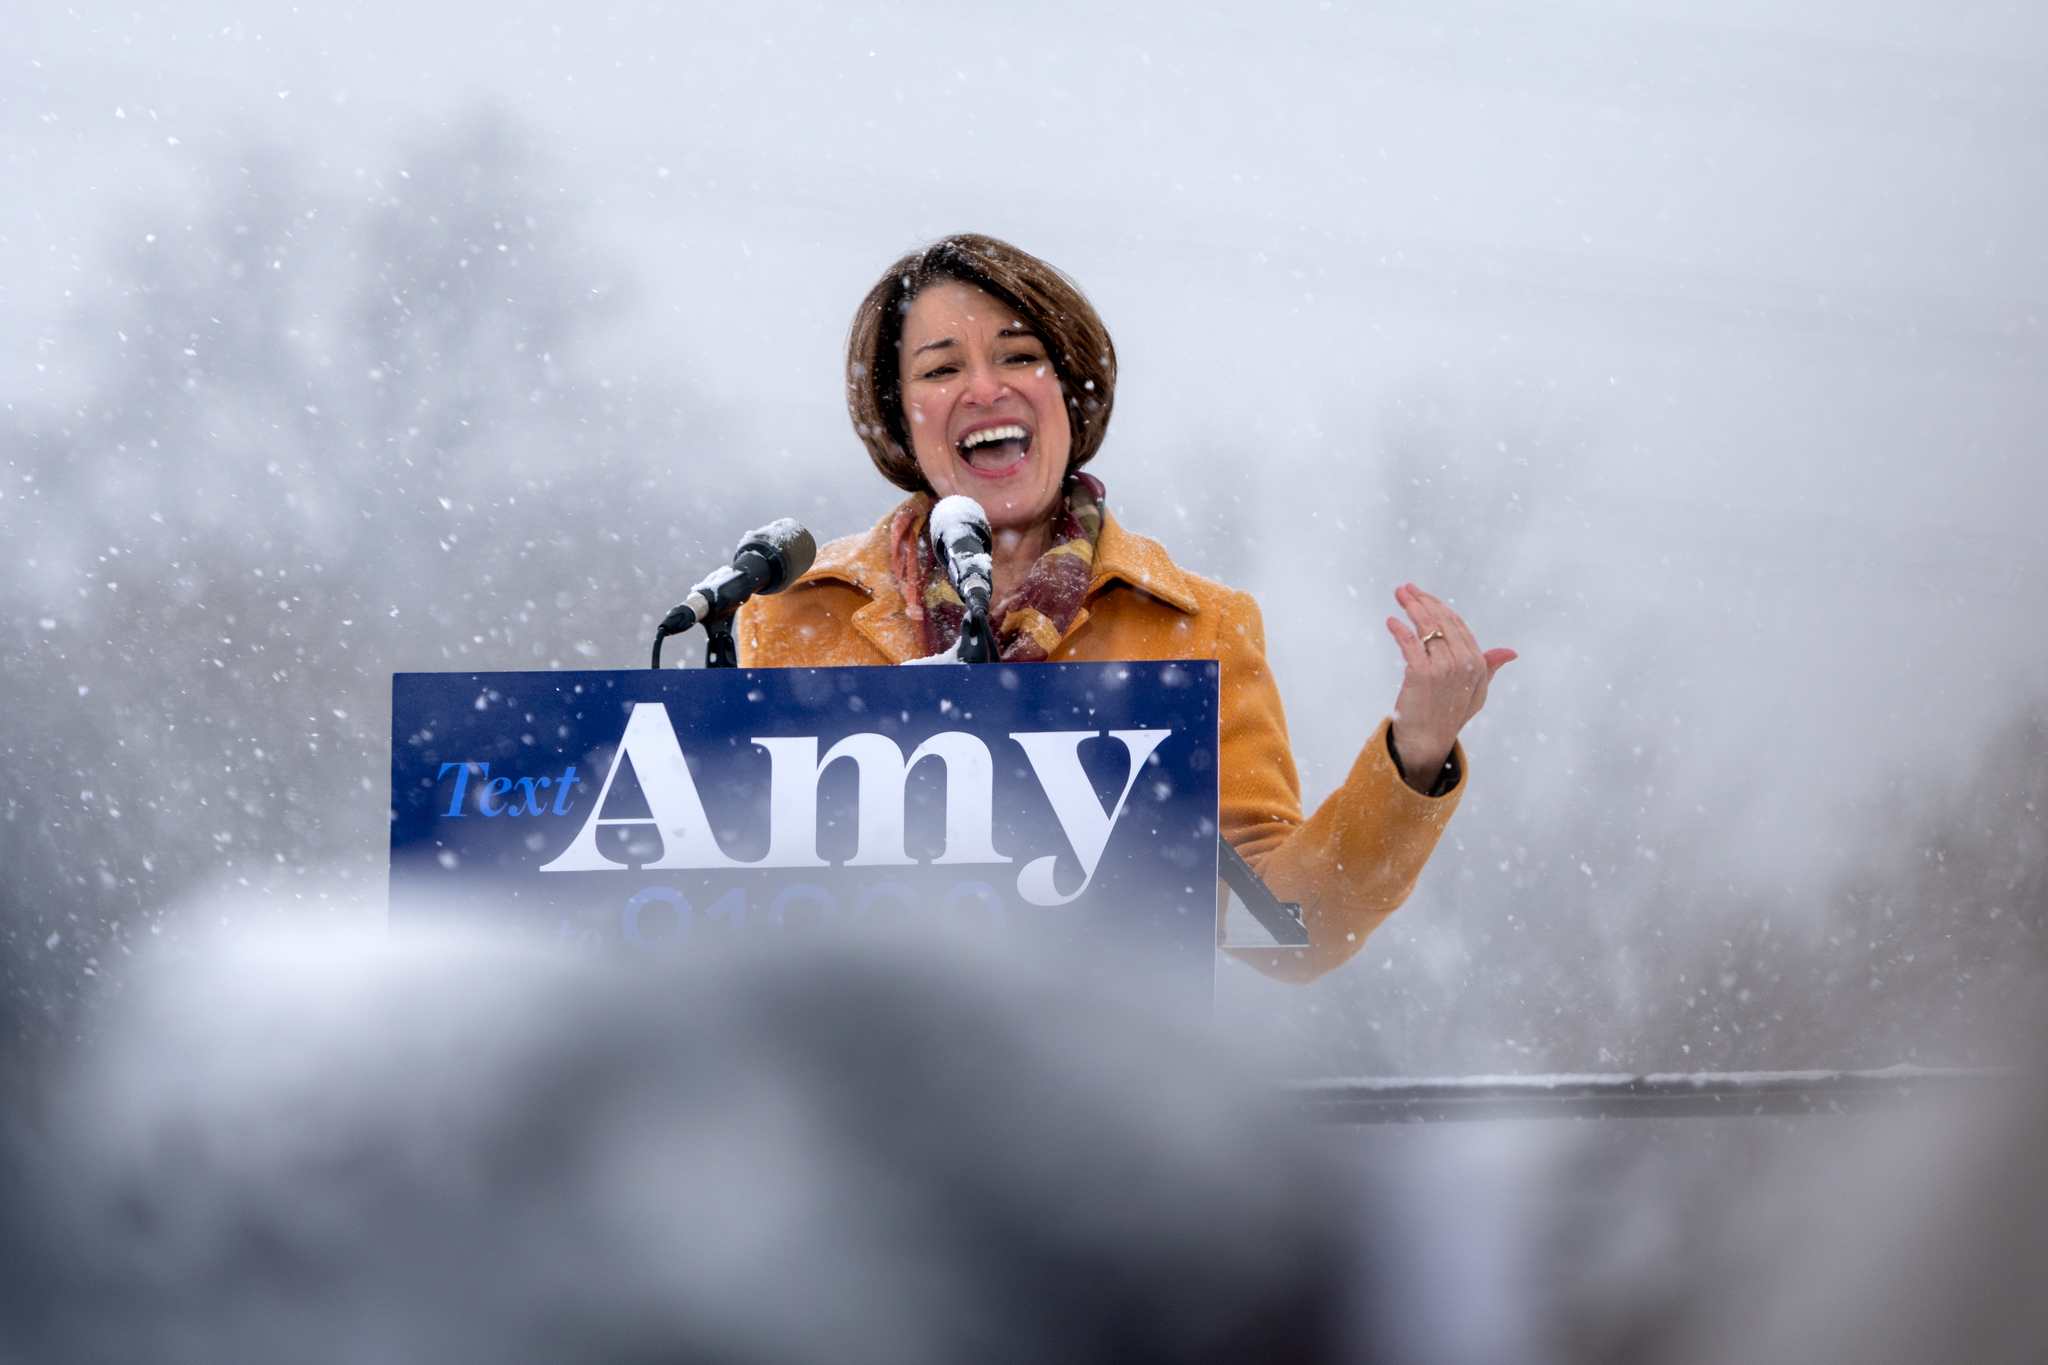 Sen. Amy Klobuchar announcing her presidential candidacy in a snowstorm.